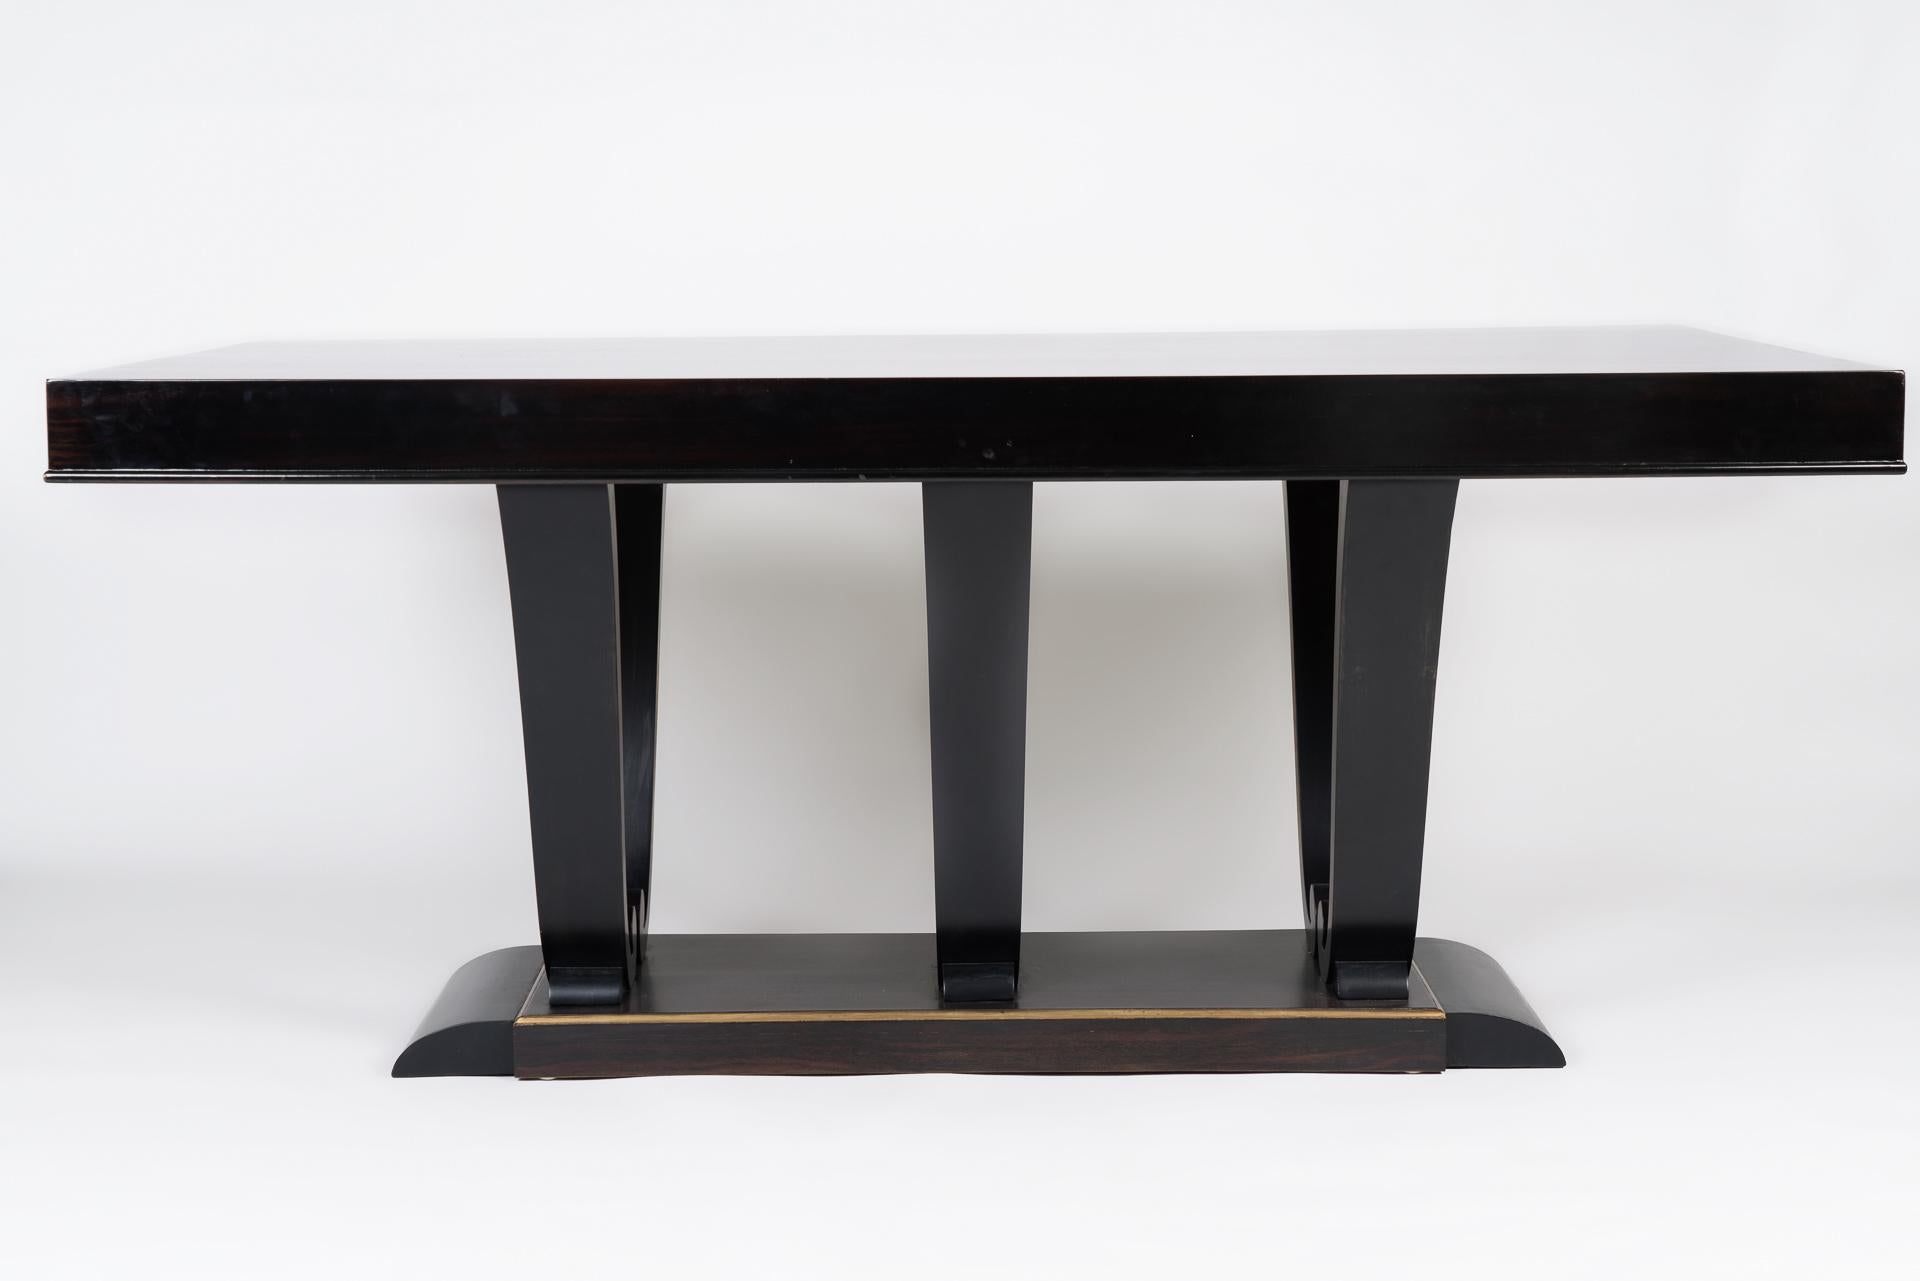 This dining table takes its inspiration from the Art Deco designs of Jacques-Emile Ruhlmann. It combines the use of mahogany woods with gold detailing. The elegant shape and proportions of the table, along with the excellence in craftsmanship, make